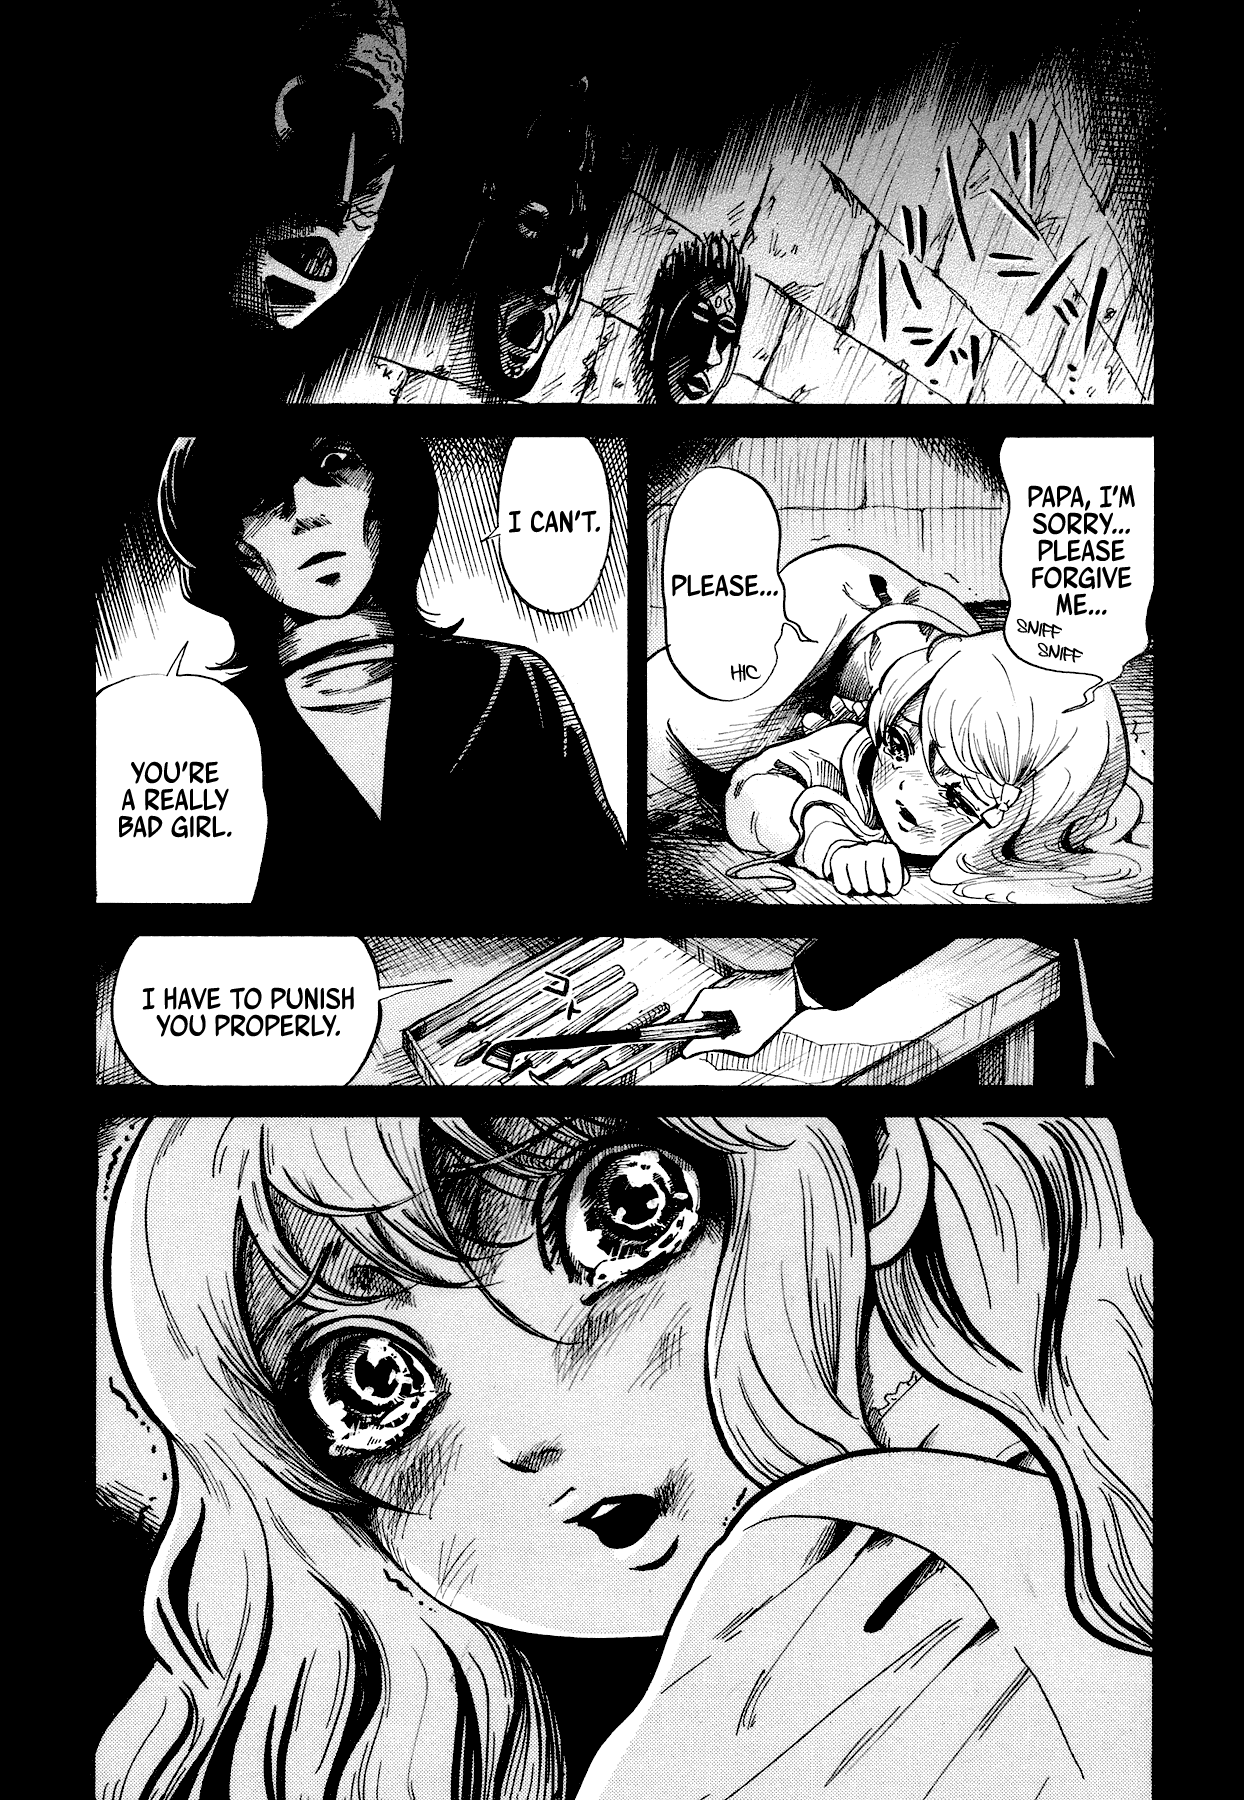 Children, Don't Play In The Dark - Page 1